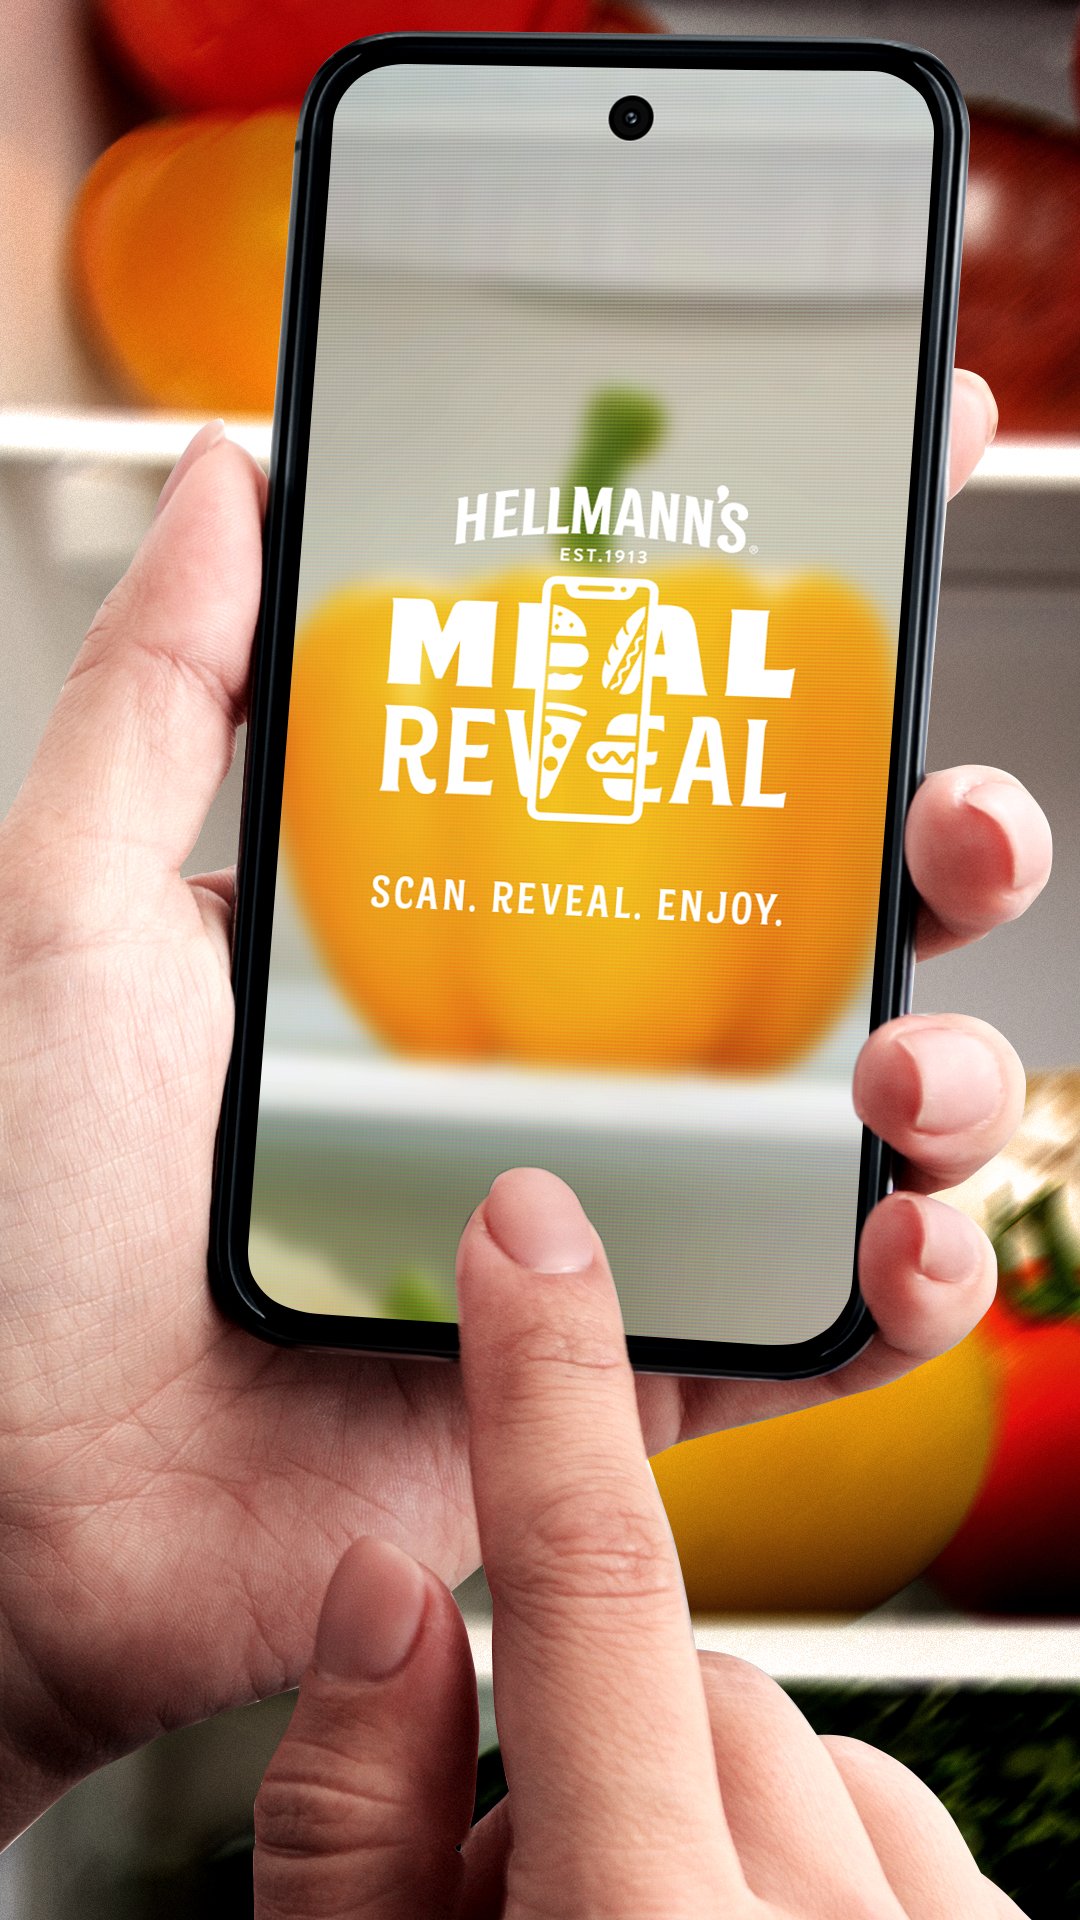 Hellmann’s launches AI-enabled tool to reveal fridge’s meal potential